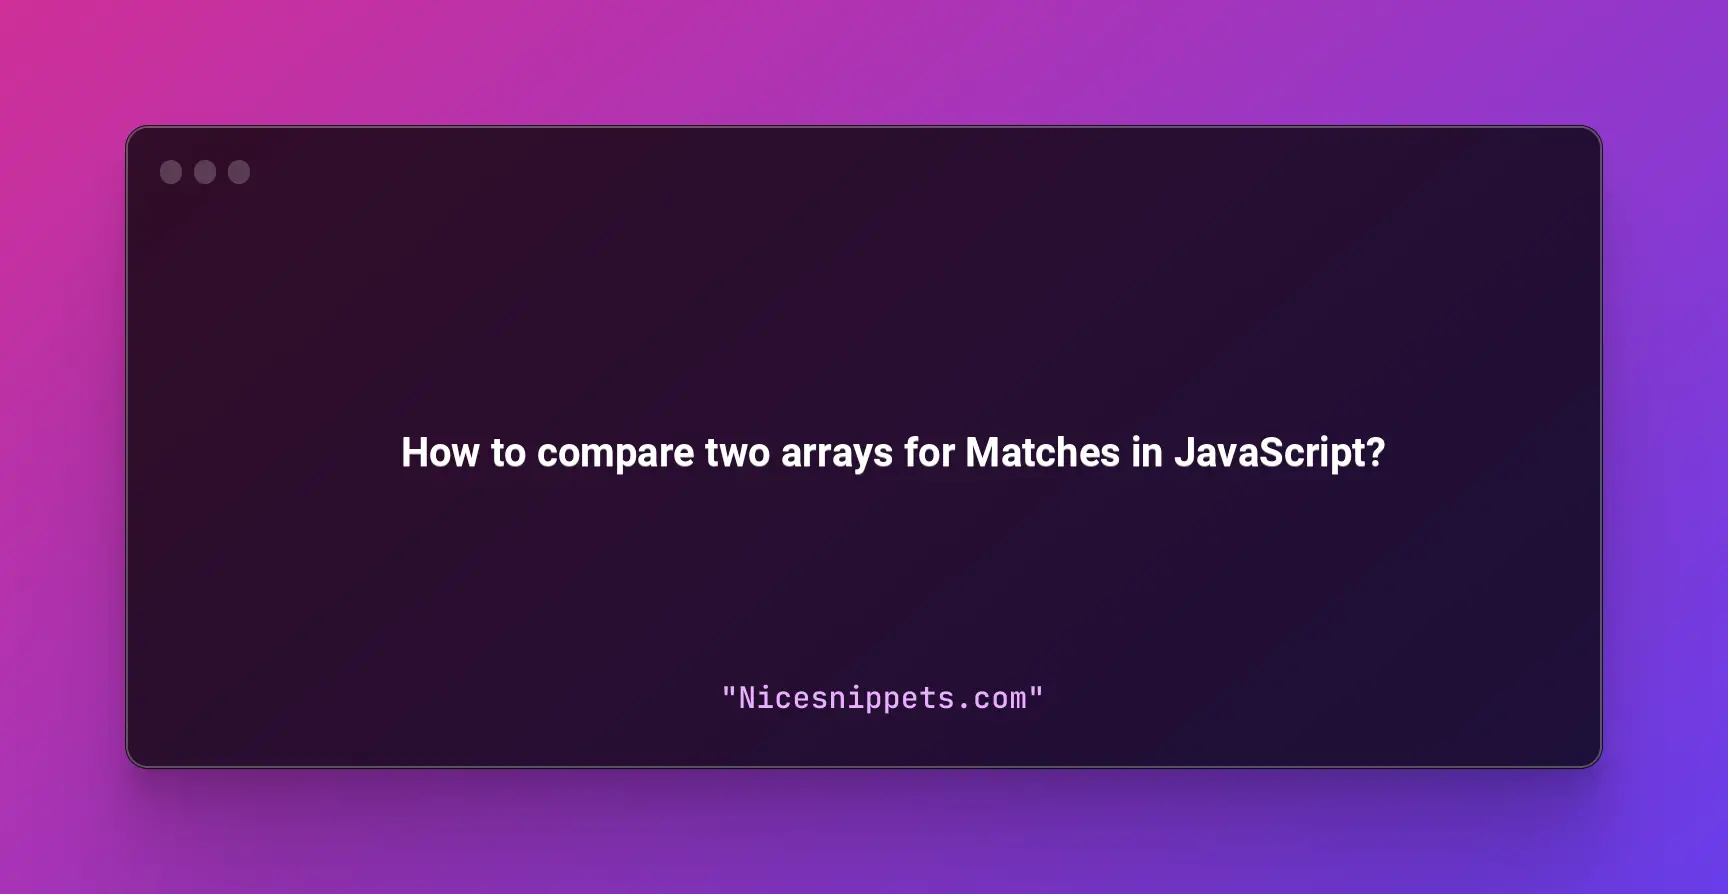 How to compare two arrays for Matches in JavaScript?